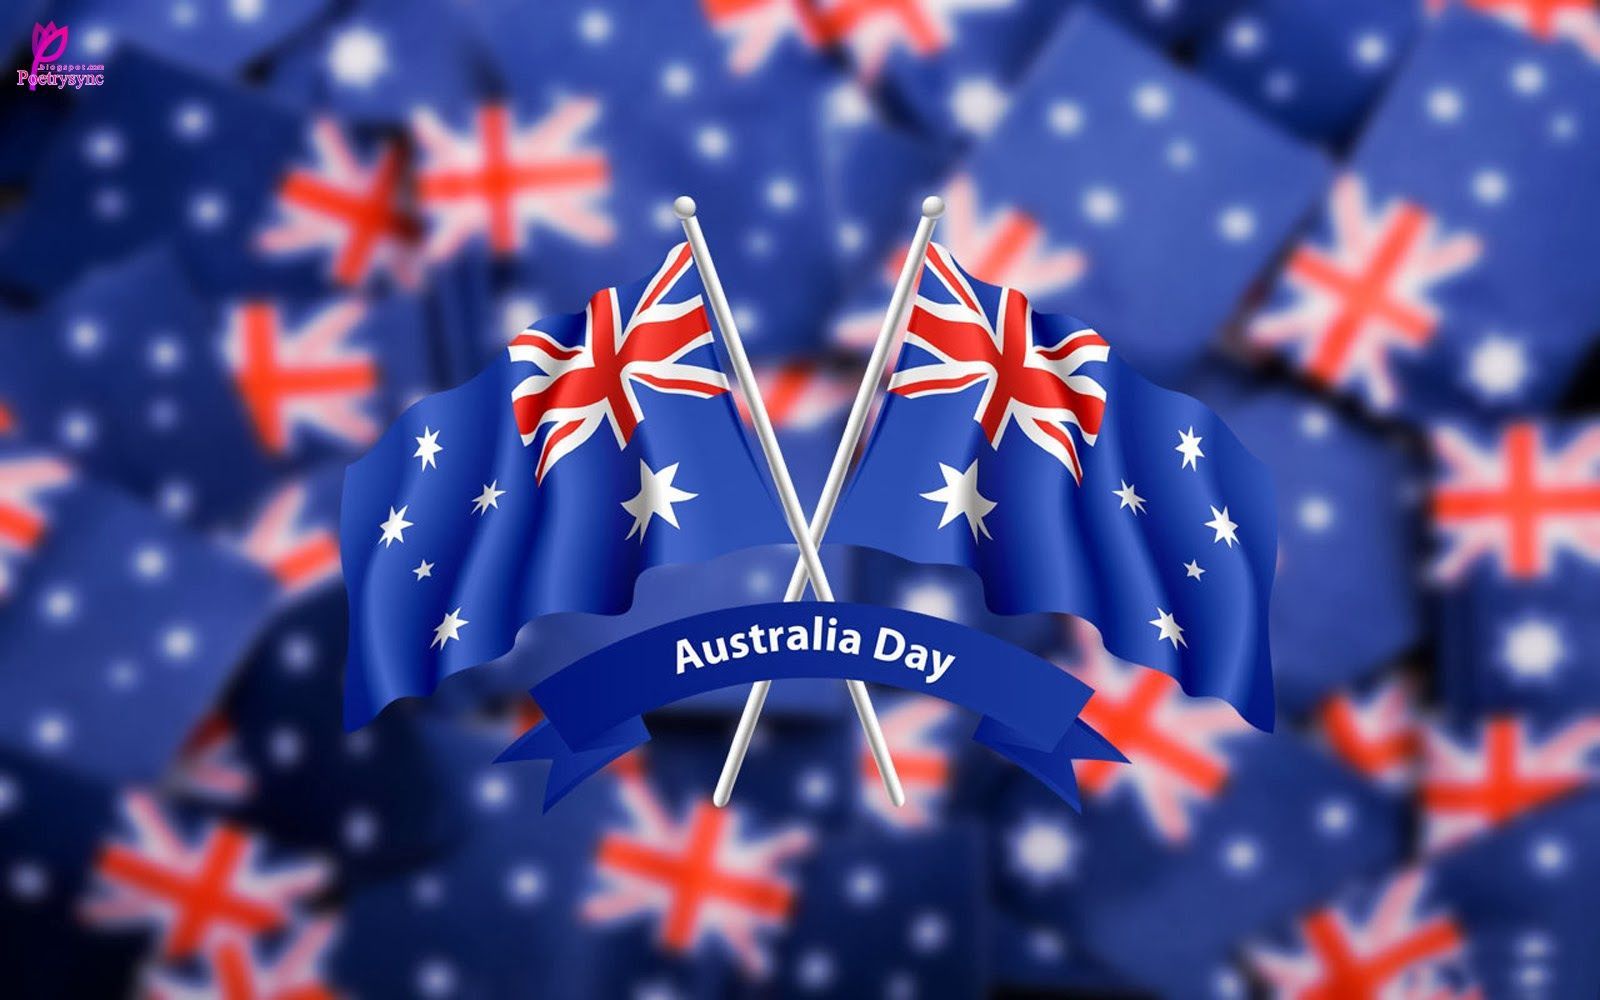 Poetry: Australia Day Wishes Quotes with Wallpaper. Happy australia day, Australia day, Australia day fireworks